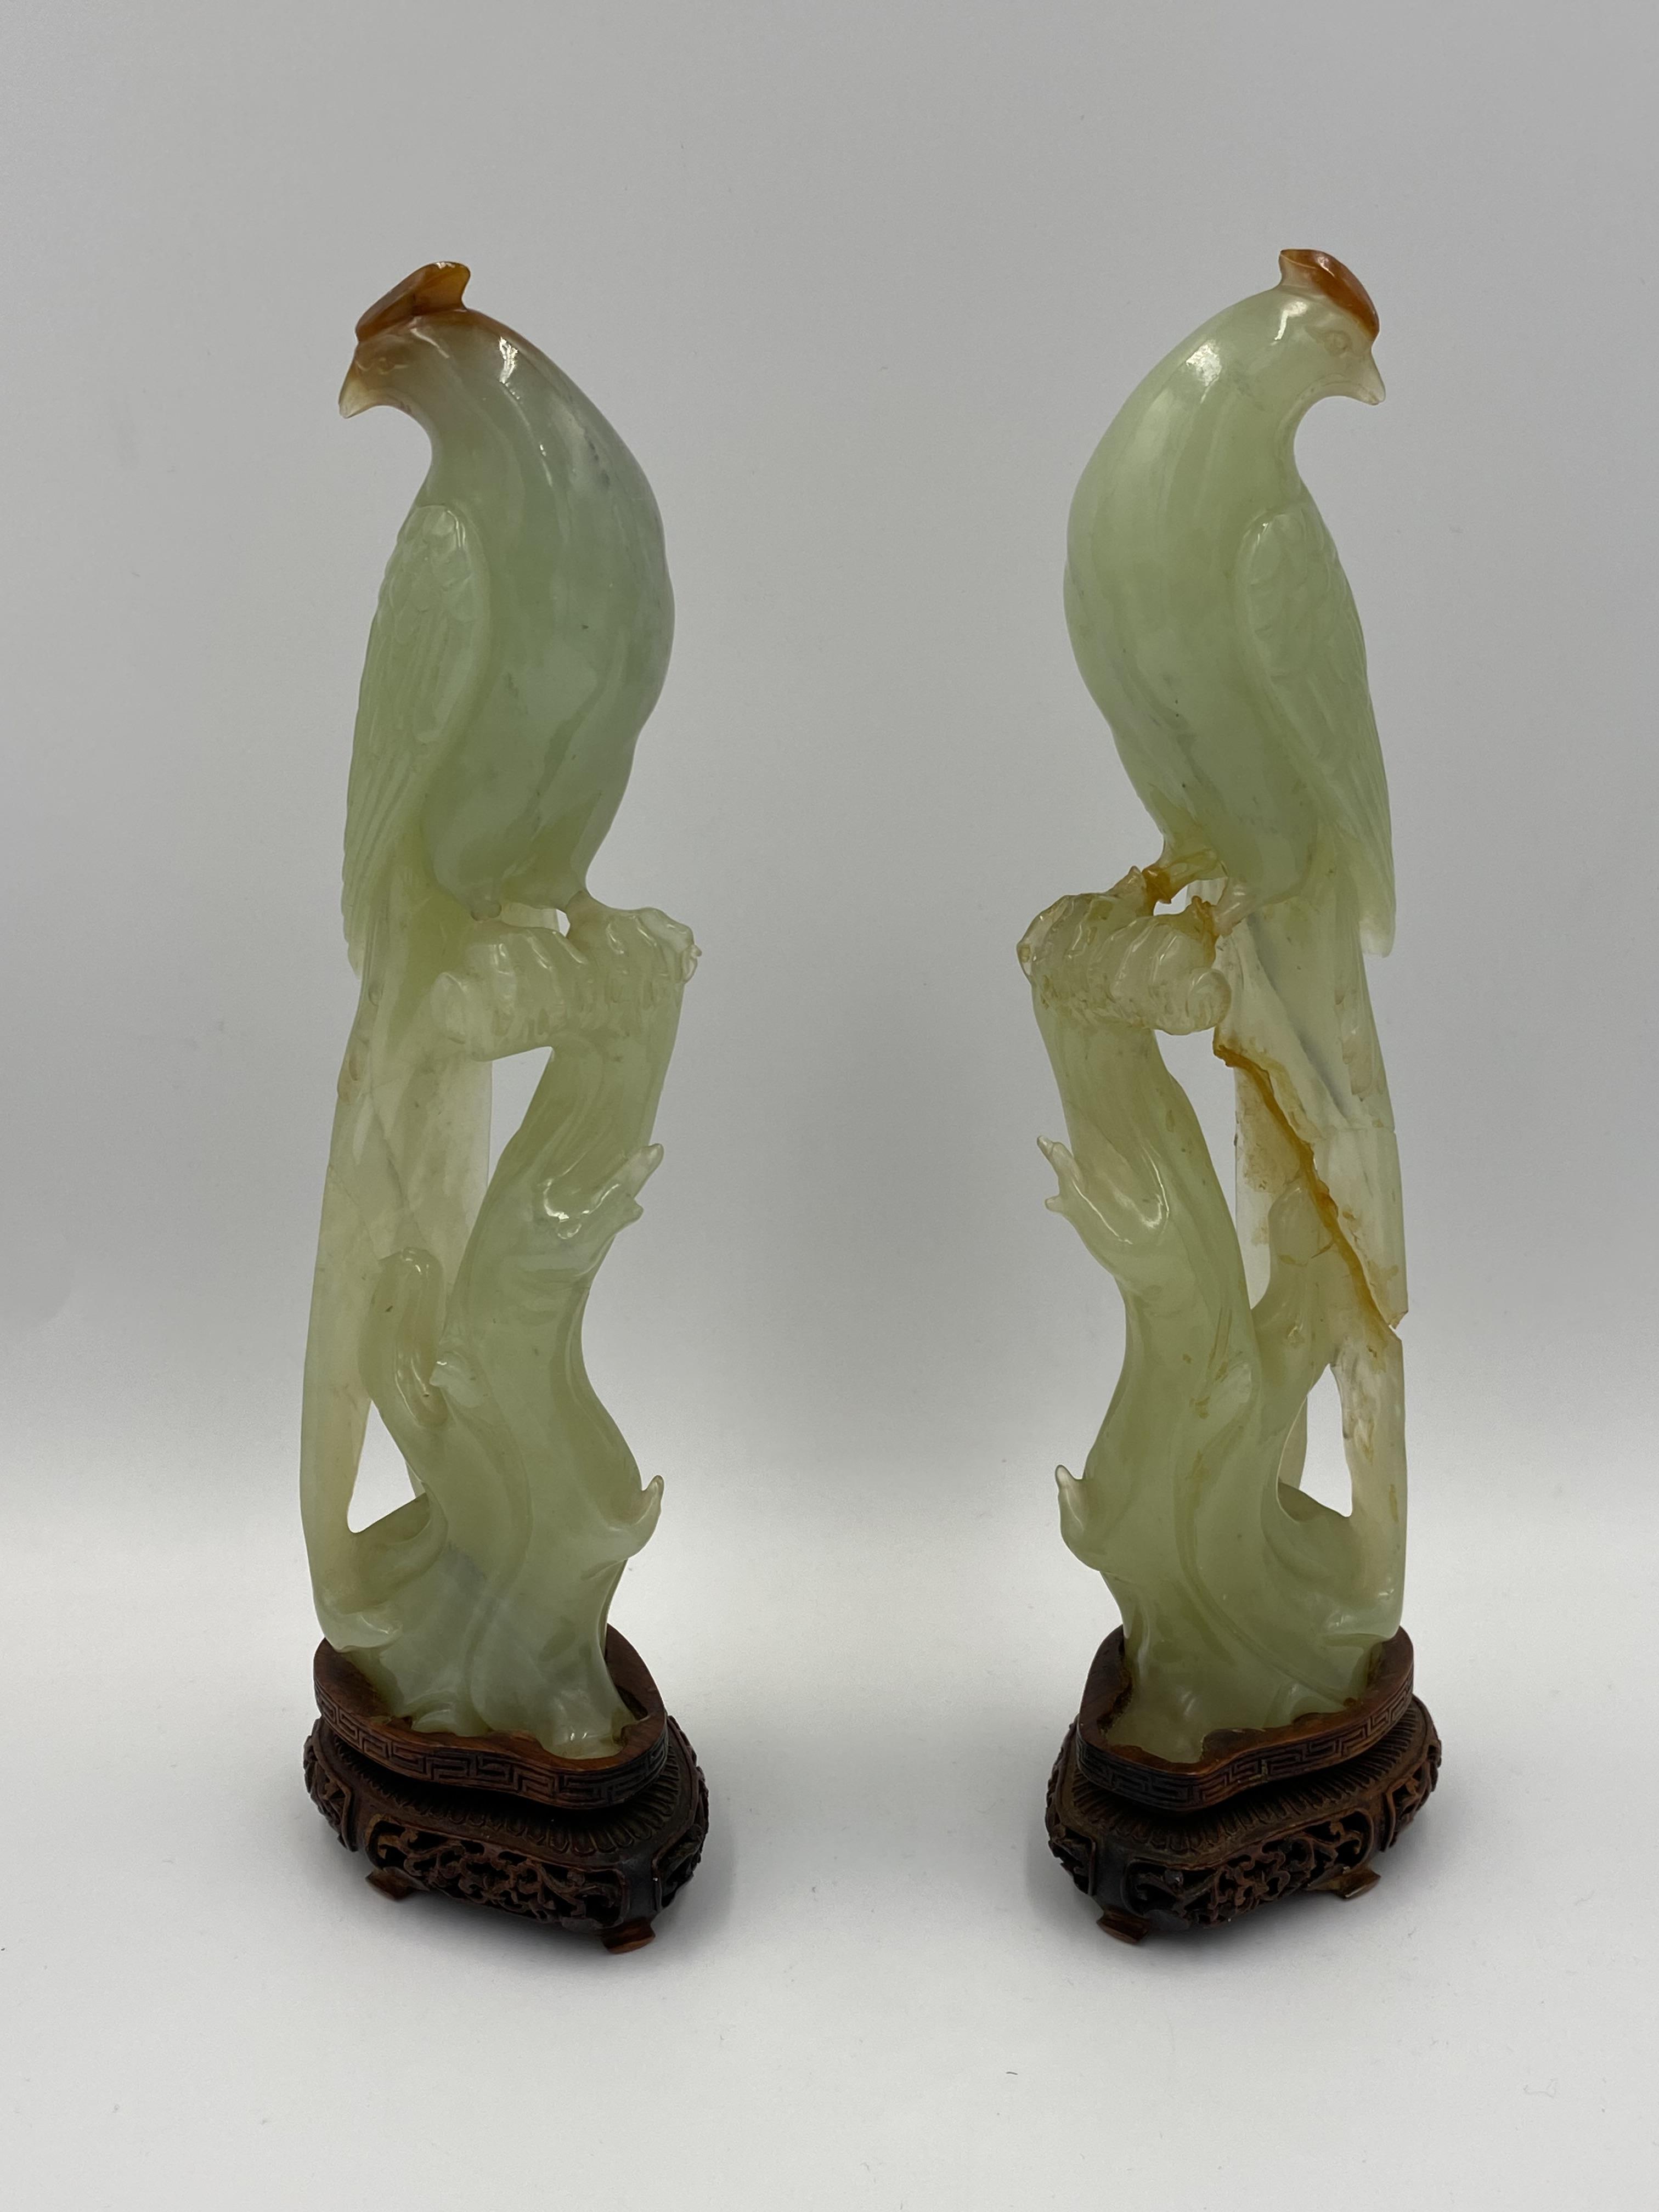 Pair of early 20th century chinese carved jade birds resting on tree stumps - Image 12 of 12